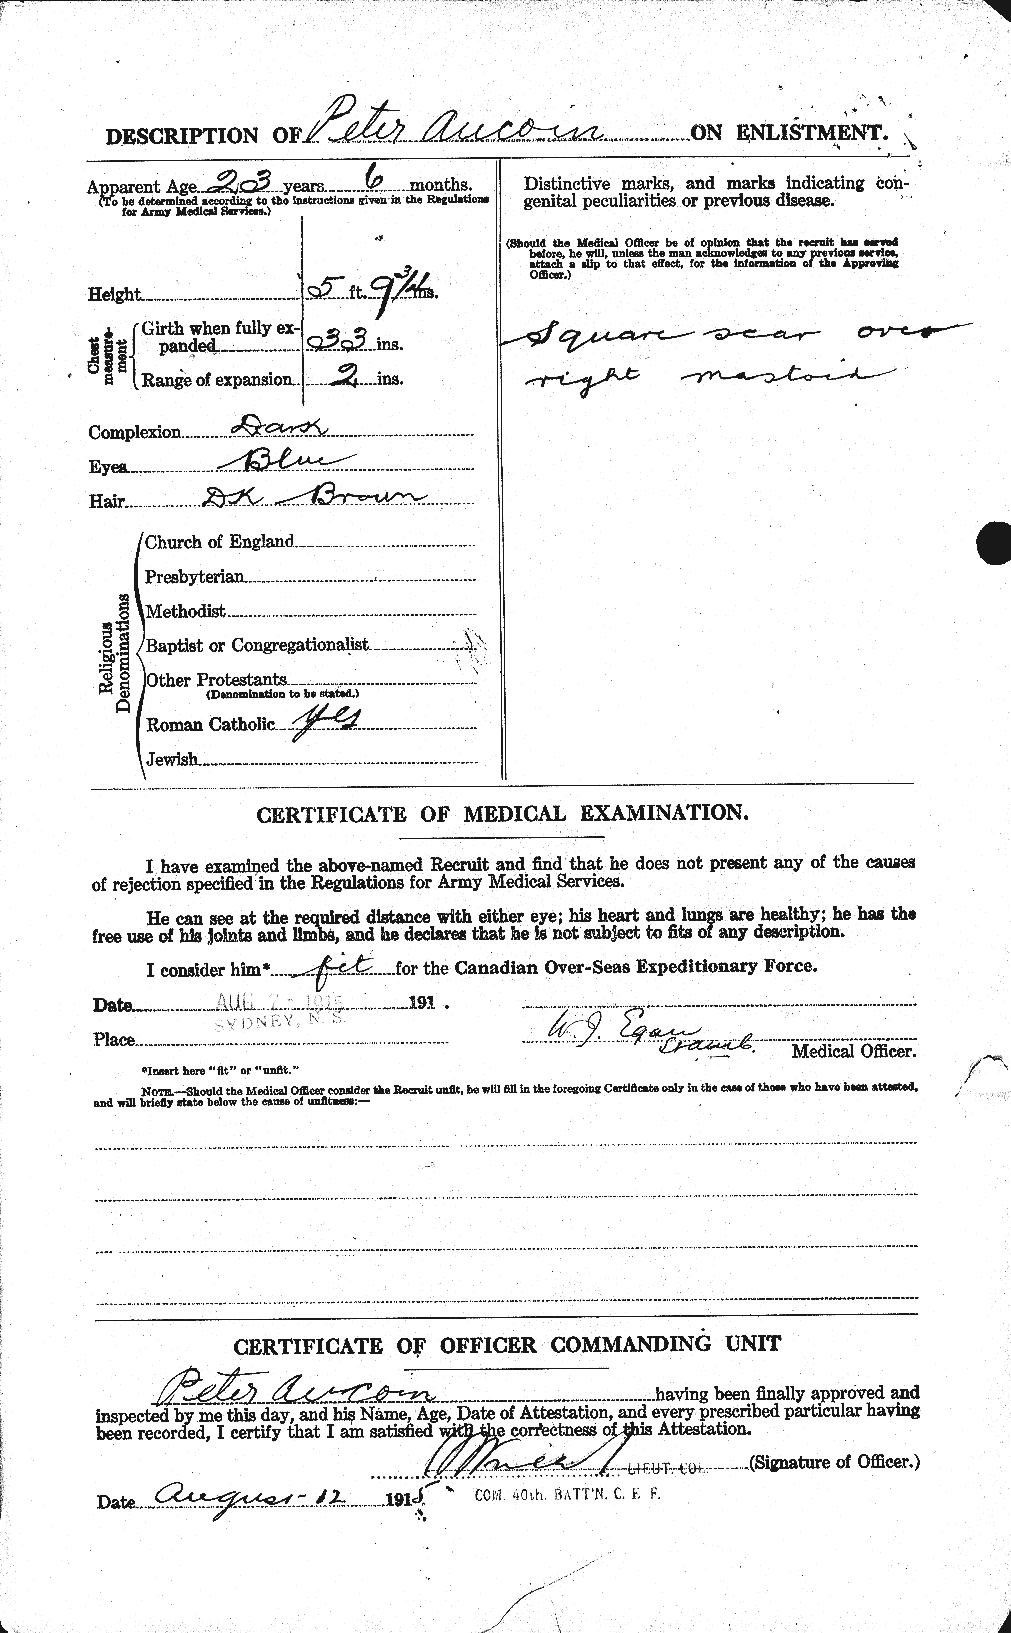 Personnel Records of the First World War - CEF 224537b